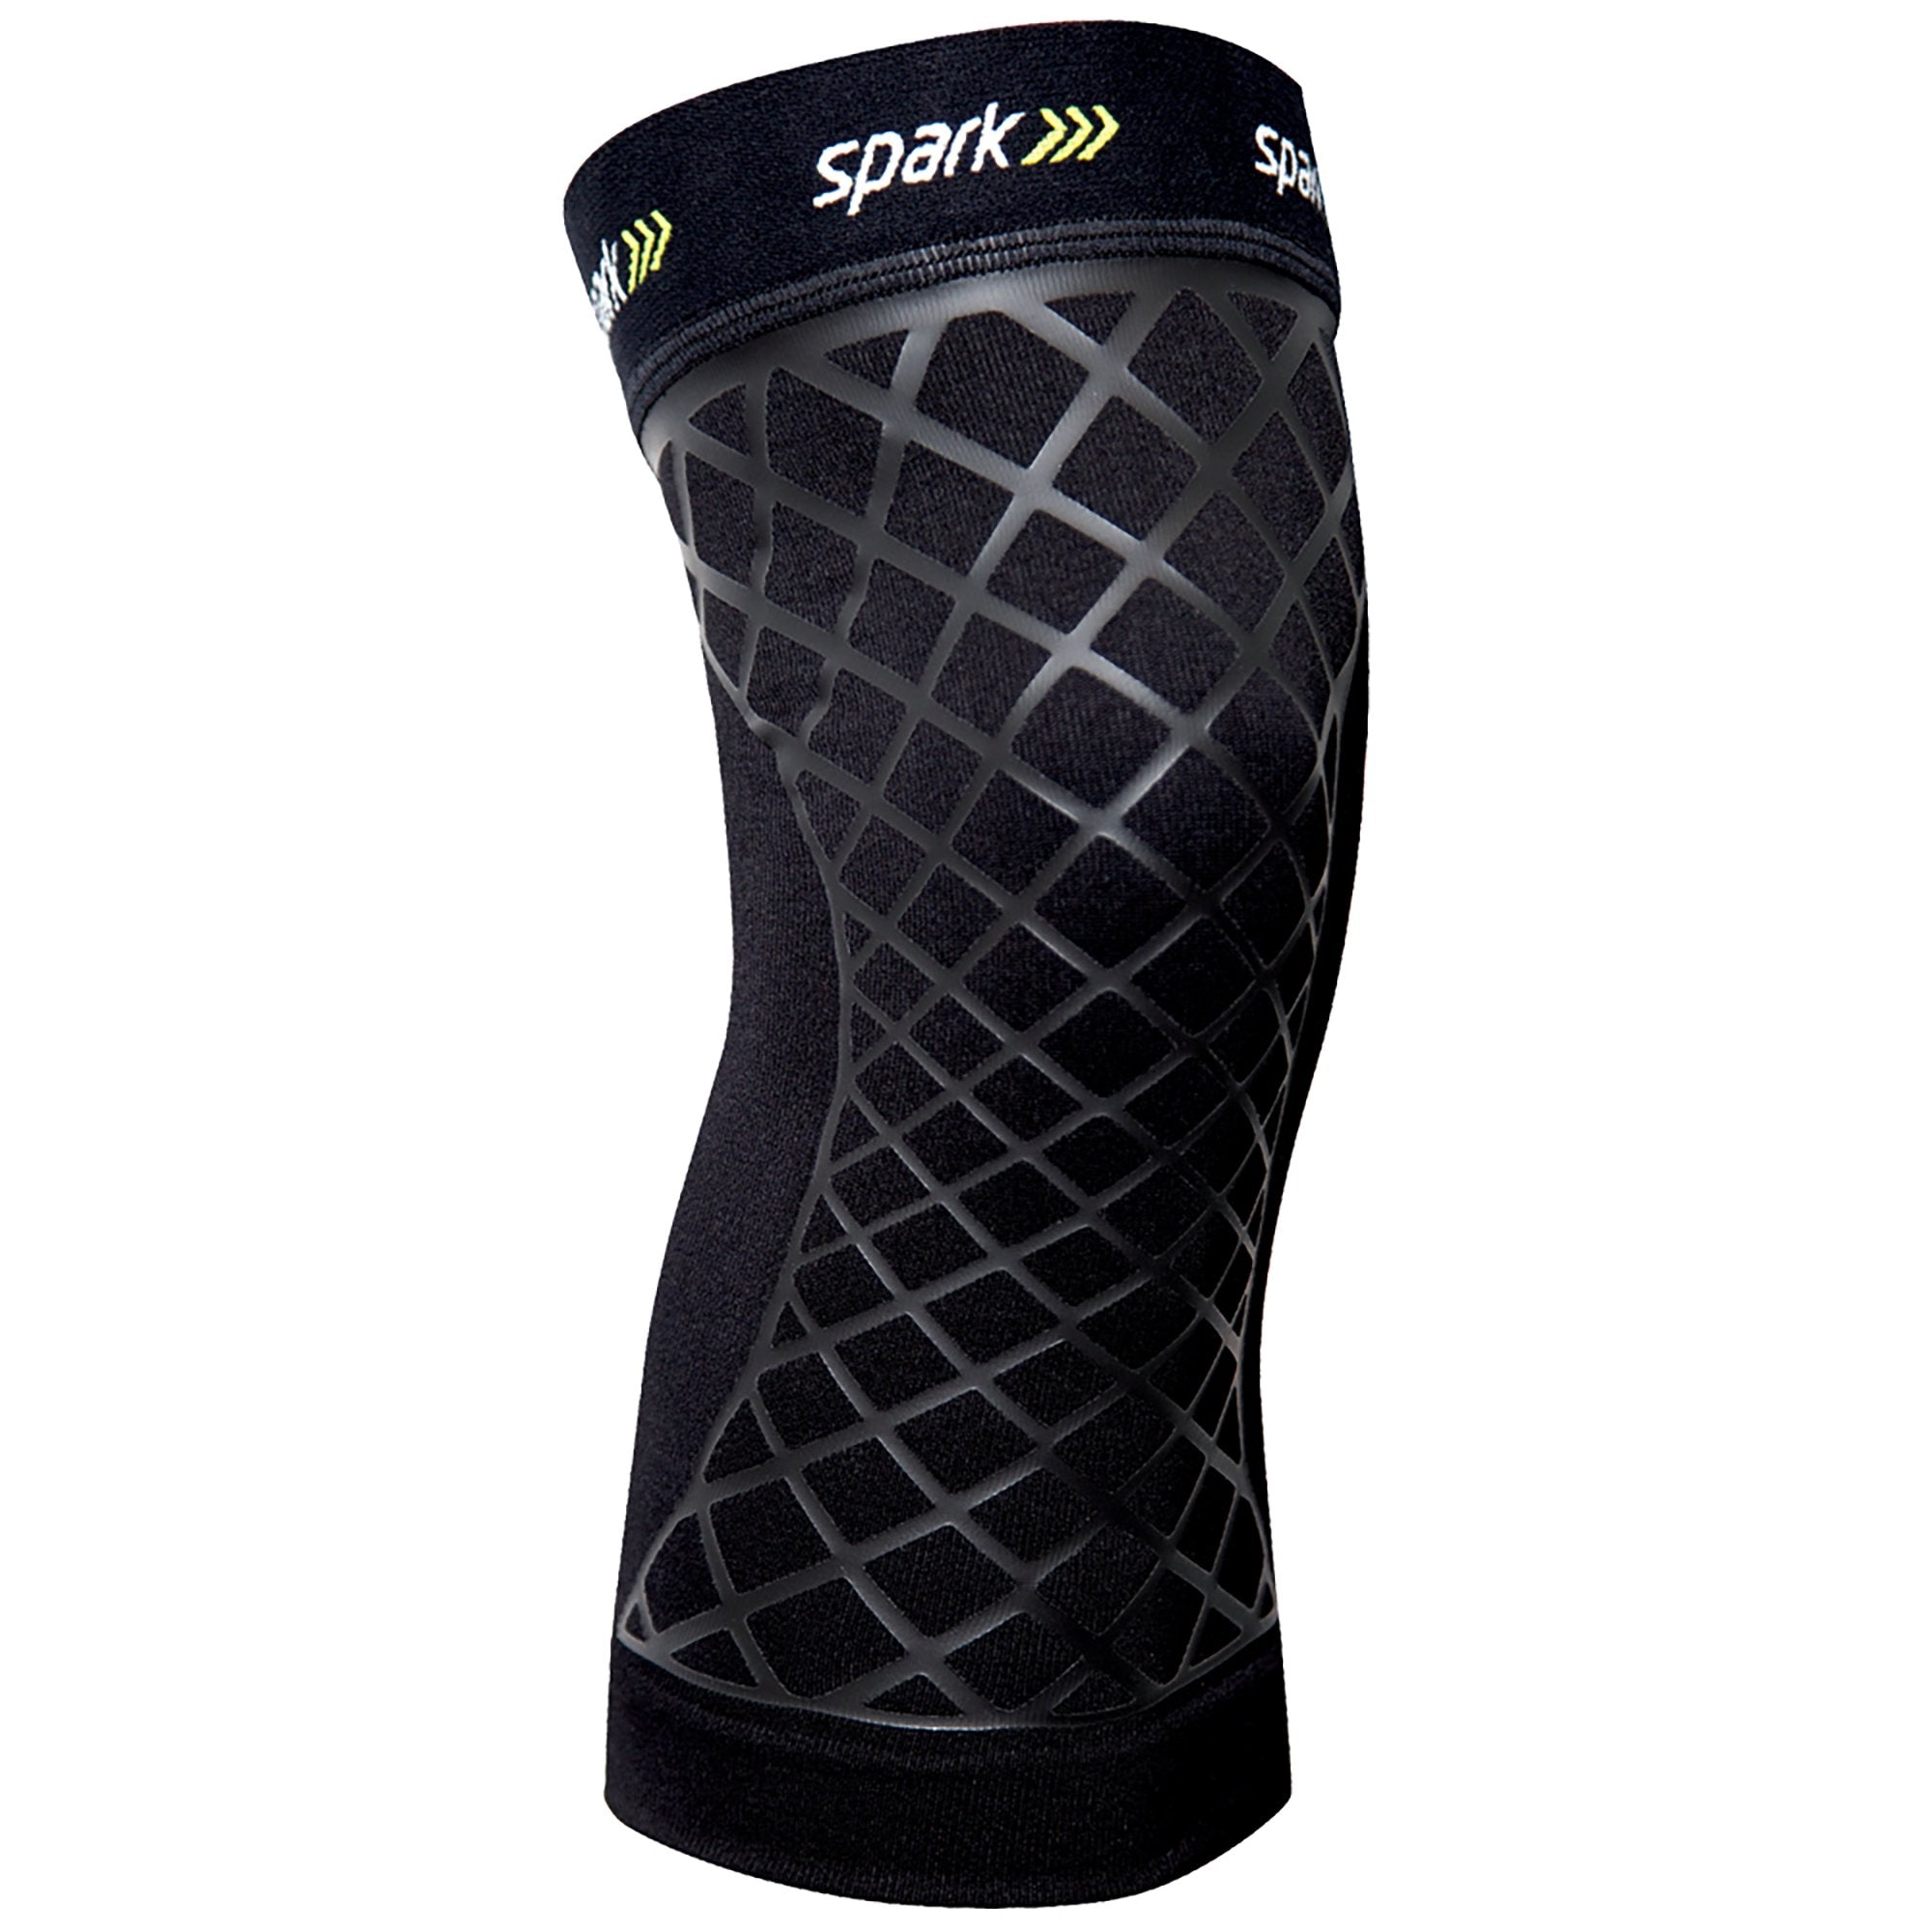 Knee Sleeve Spark Kinetic Knee Large Pull-On 16 to 18 Inch Knee Circumference Left or Right Knee